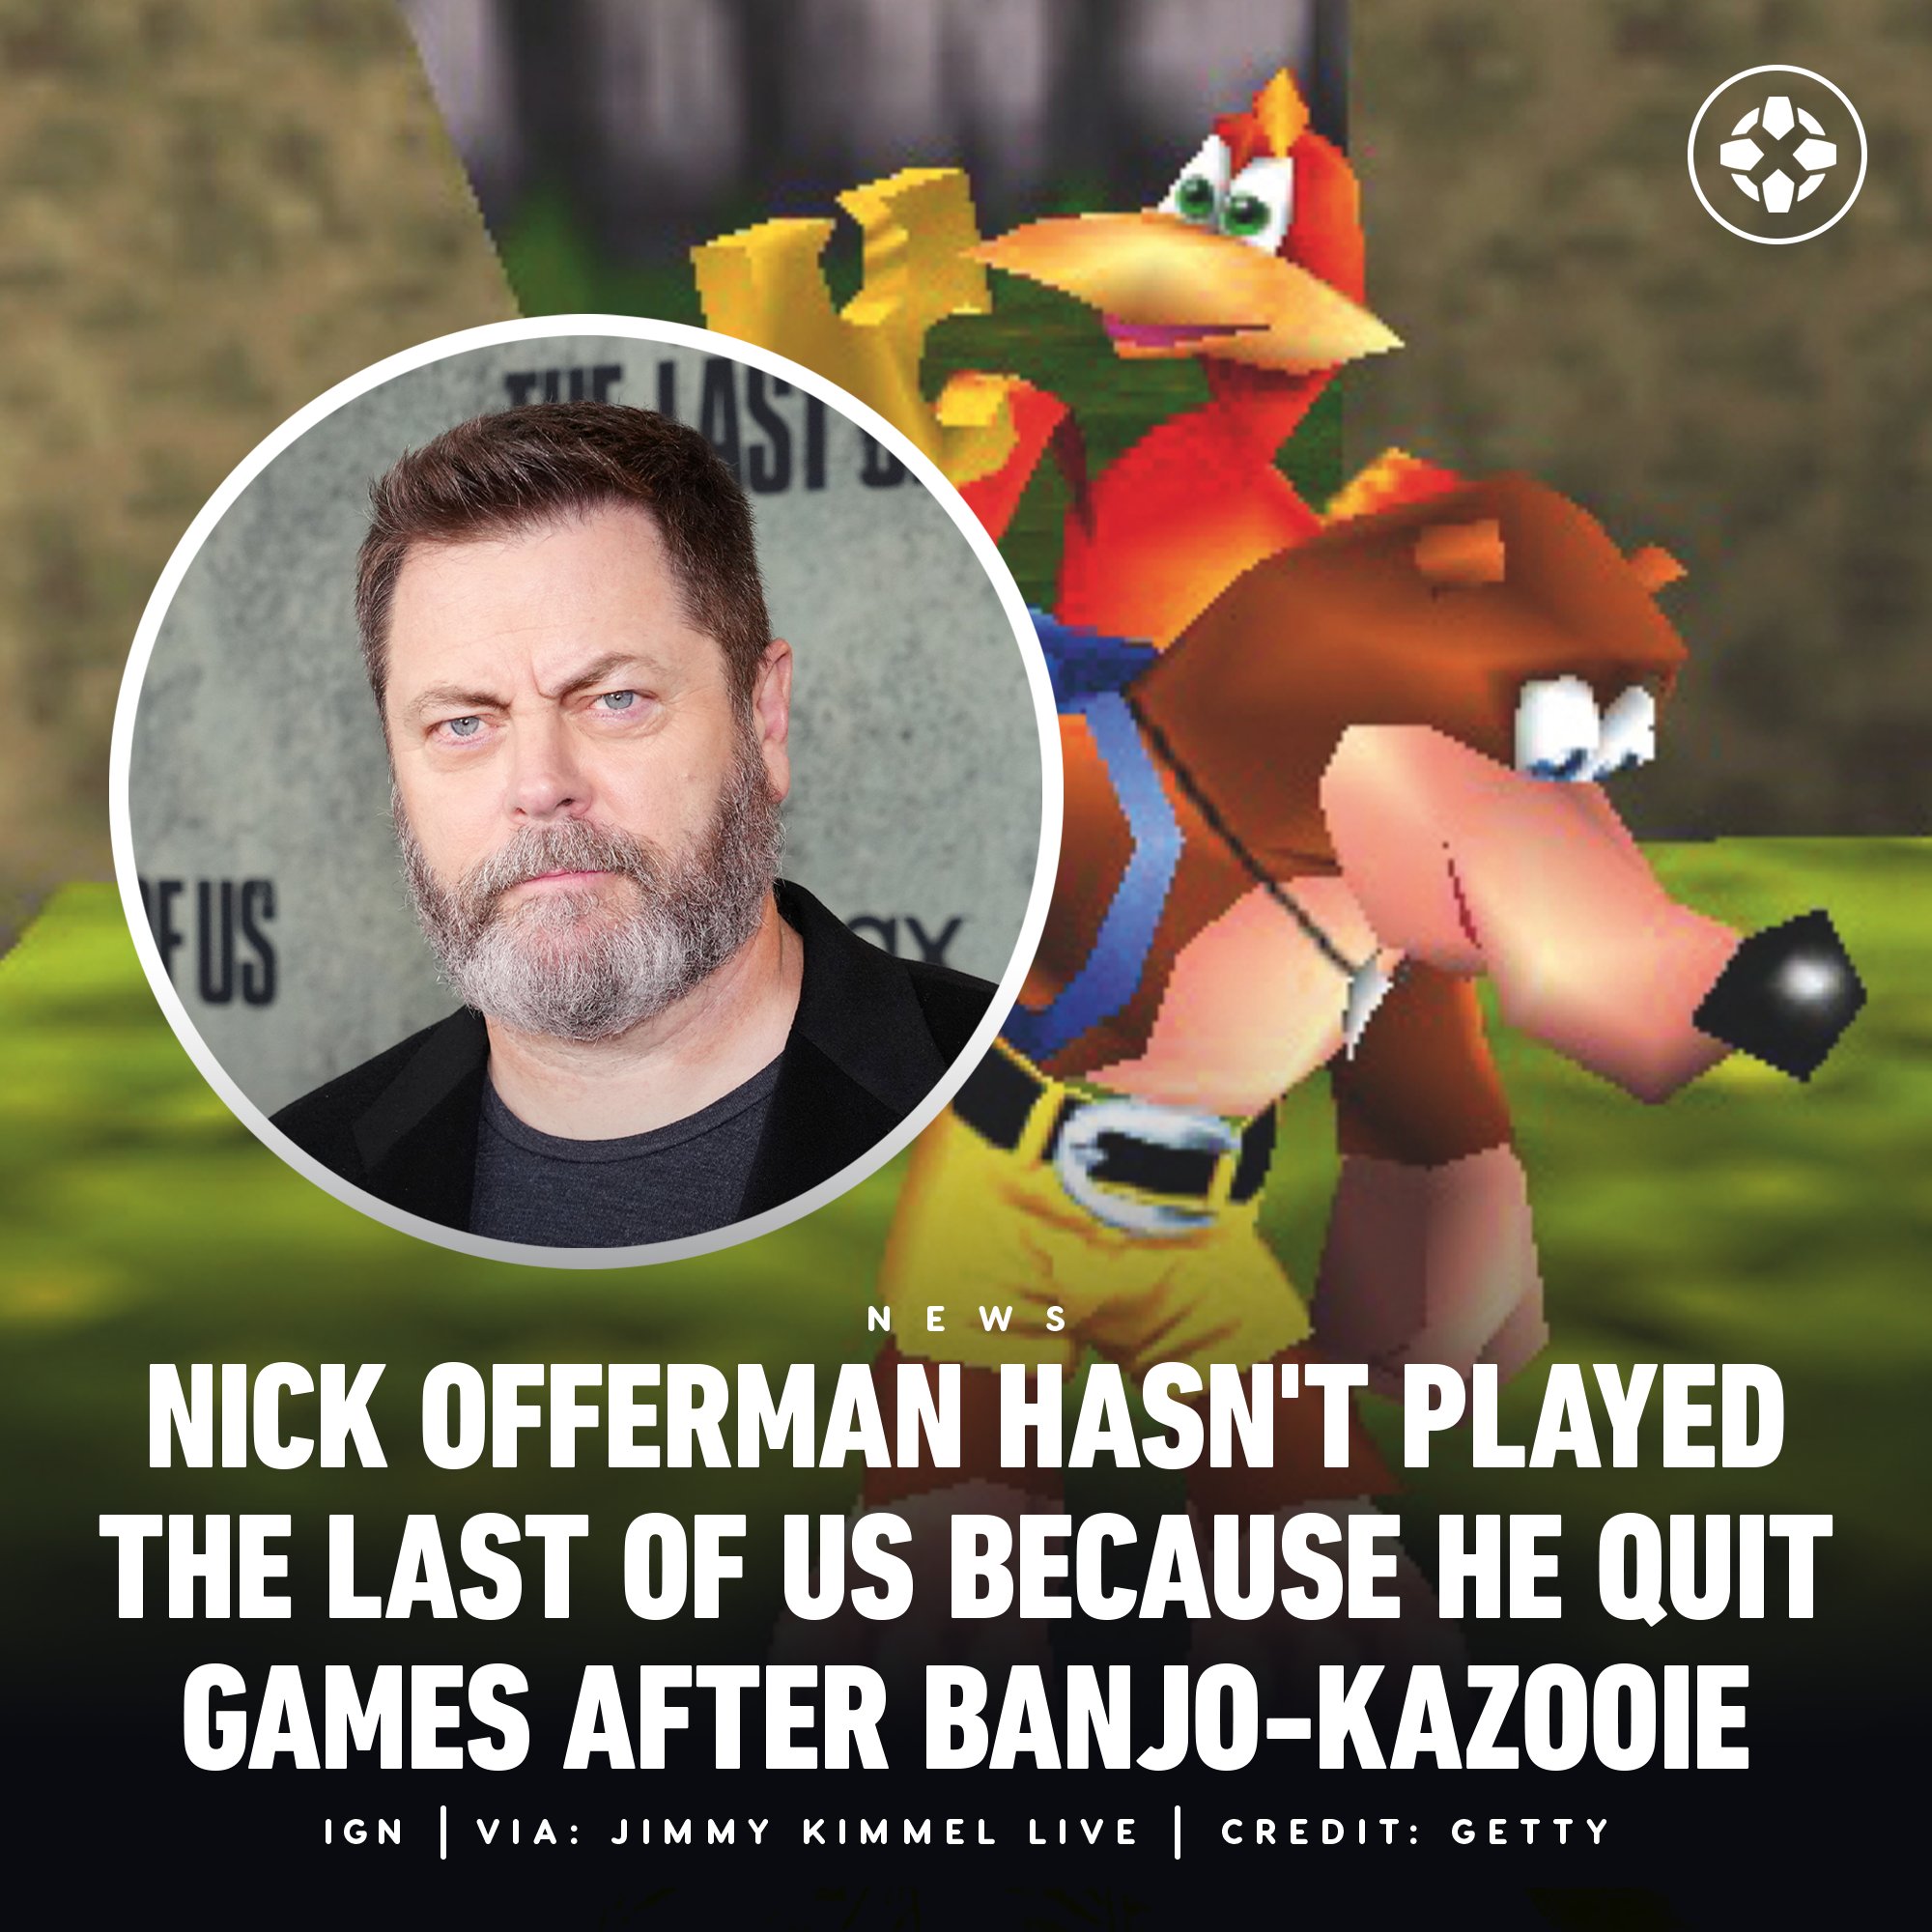 The Last of Us' Nick Offerman hasn't picked up game since Banjo-Kazooie -  Polygon